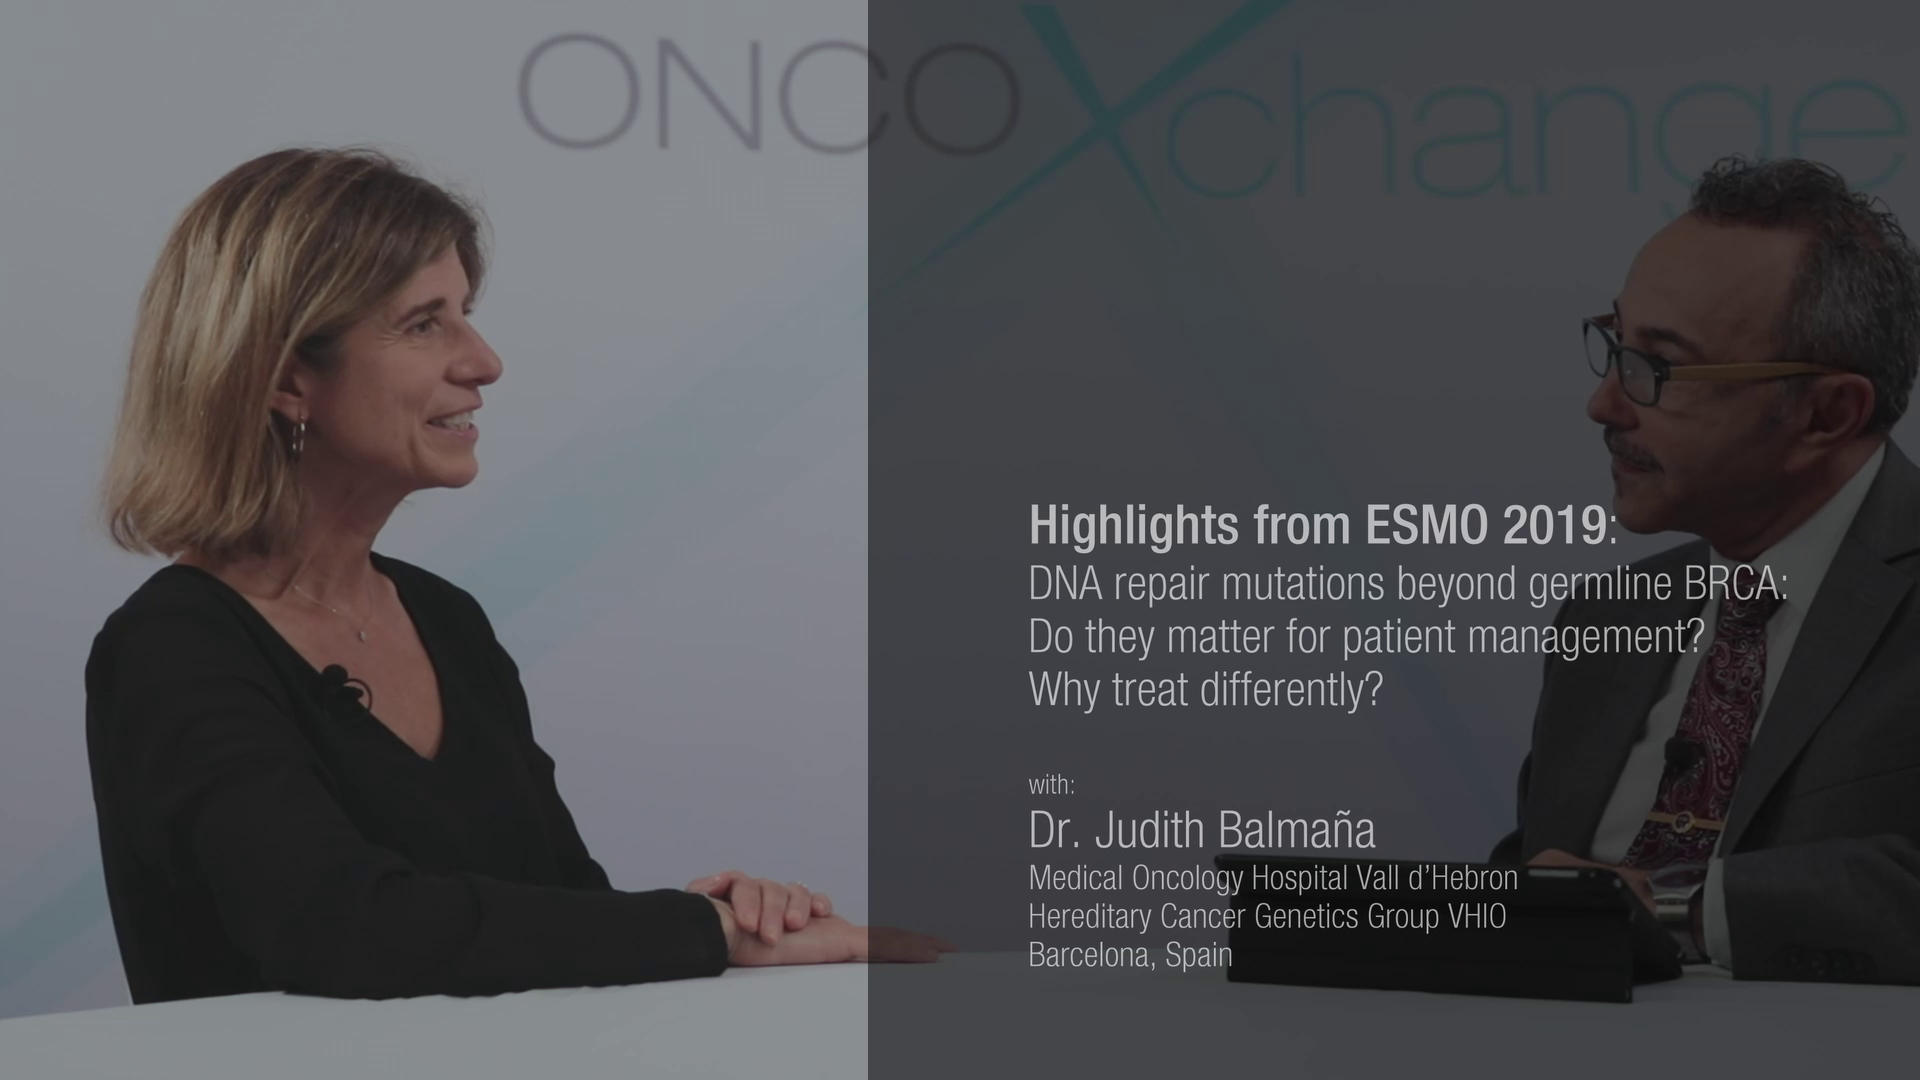 DNA repair mutations beyond germline BRCA: Do they matter for patient management?  Why treat differently?